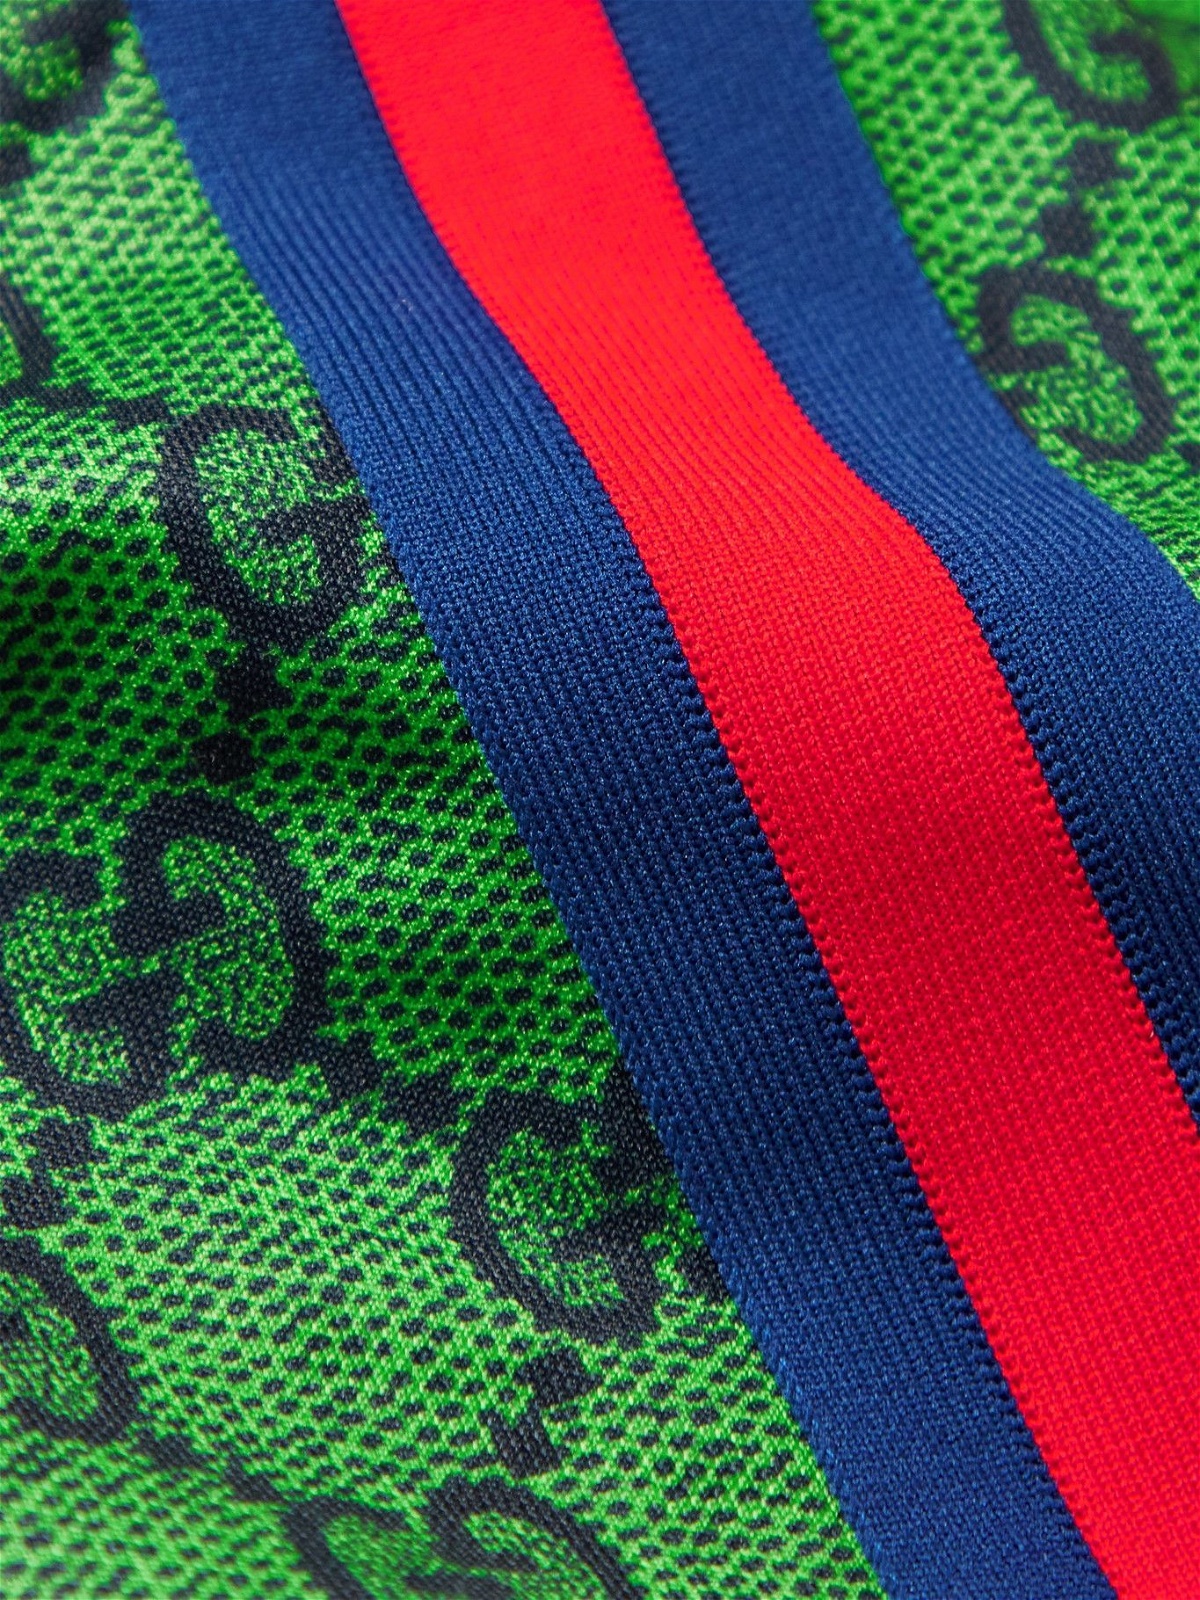 GUCCI - Striped Webbing-Trimmed Monogrammed Tech-Jersey Track